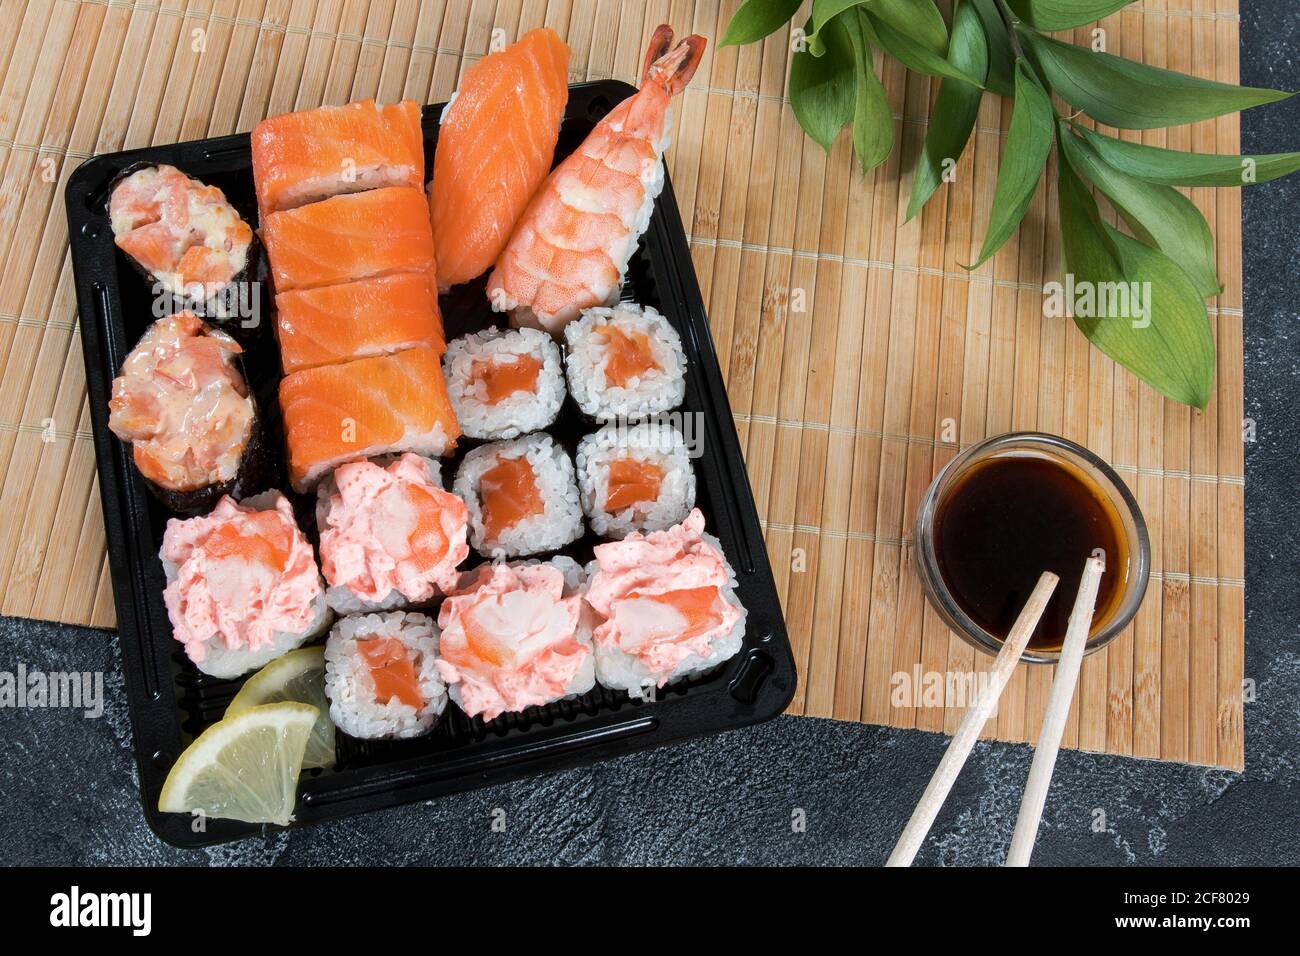 Sushi delivery box with maki, gunkan, nigiri sushi and wooden sticks with soy. Food delivery concept background Stock Photo